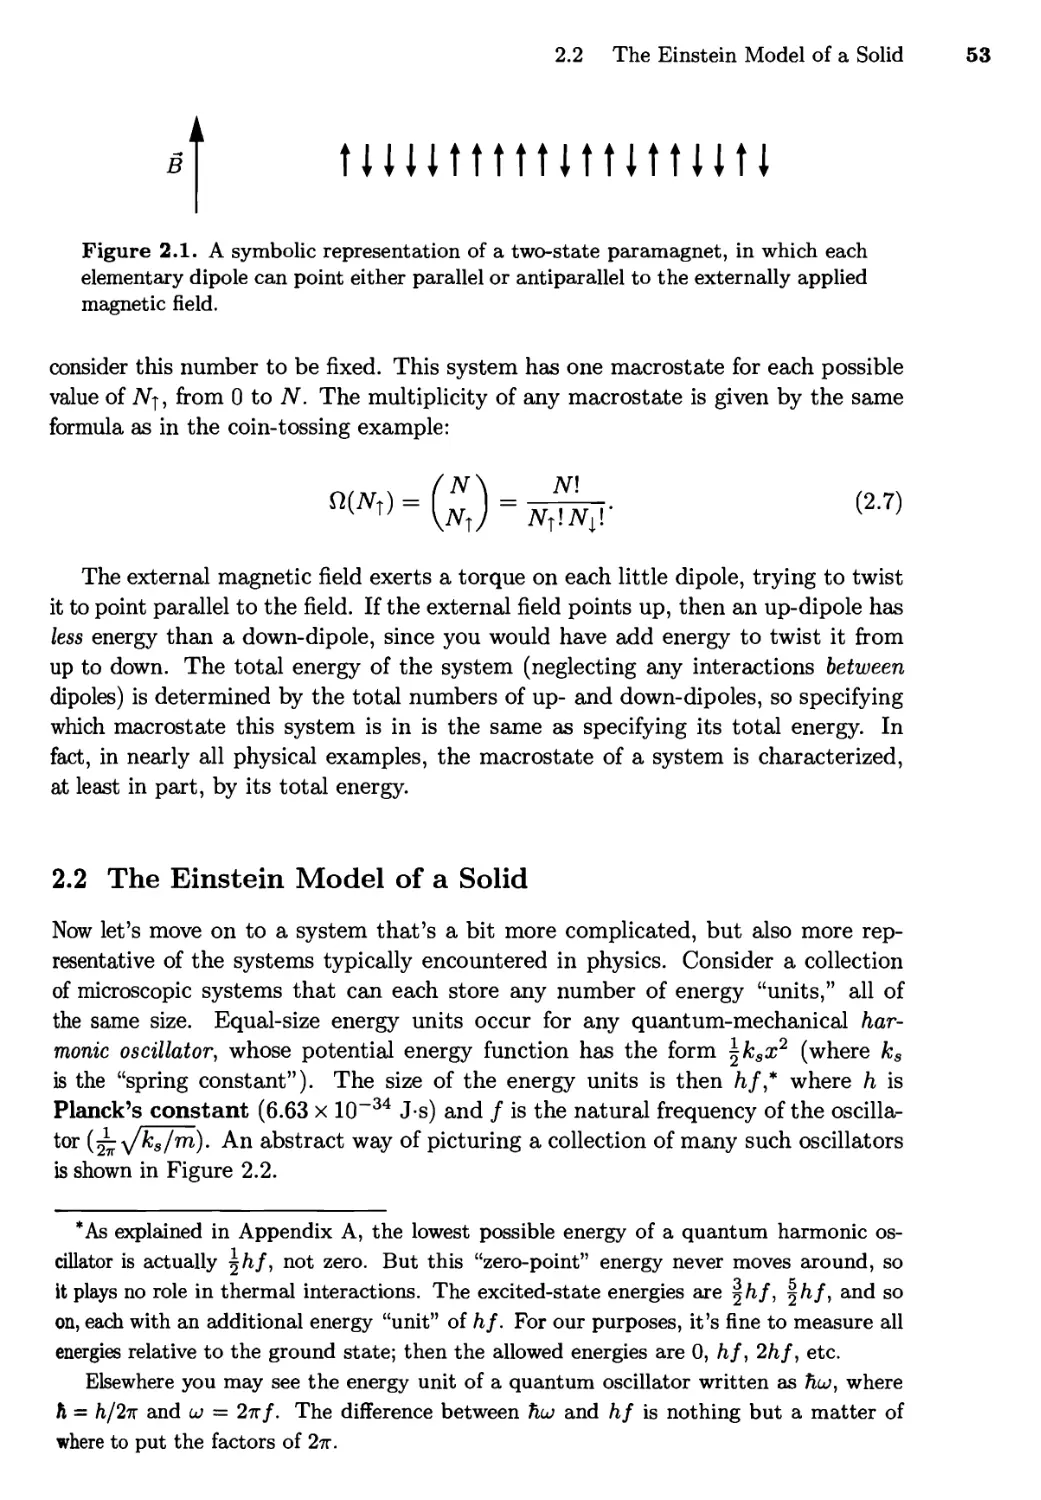 2.2 The Einstein Model of a Solid